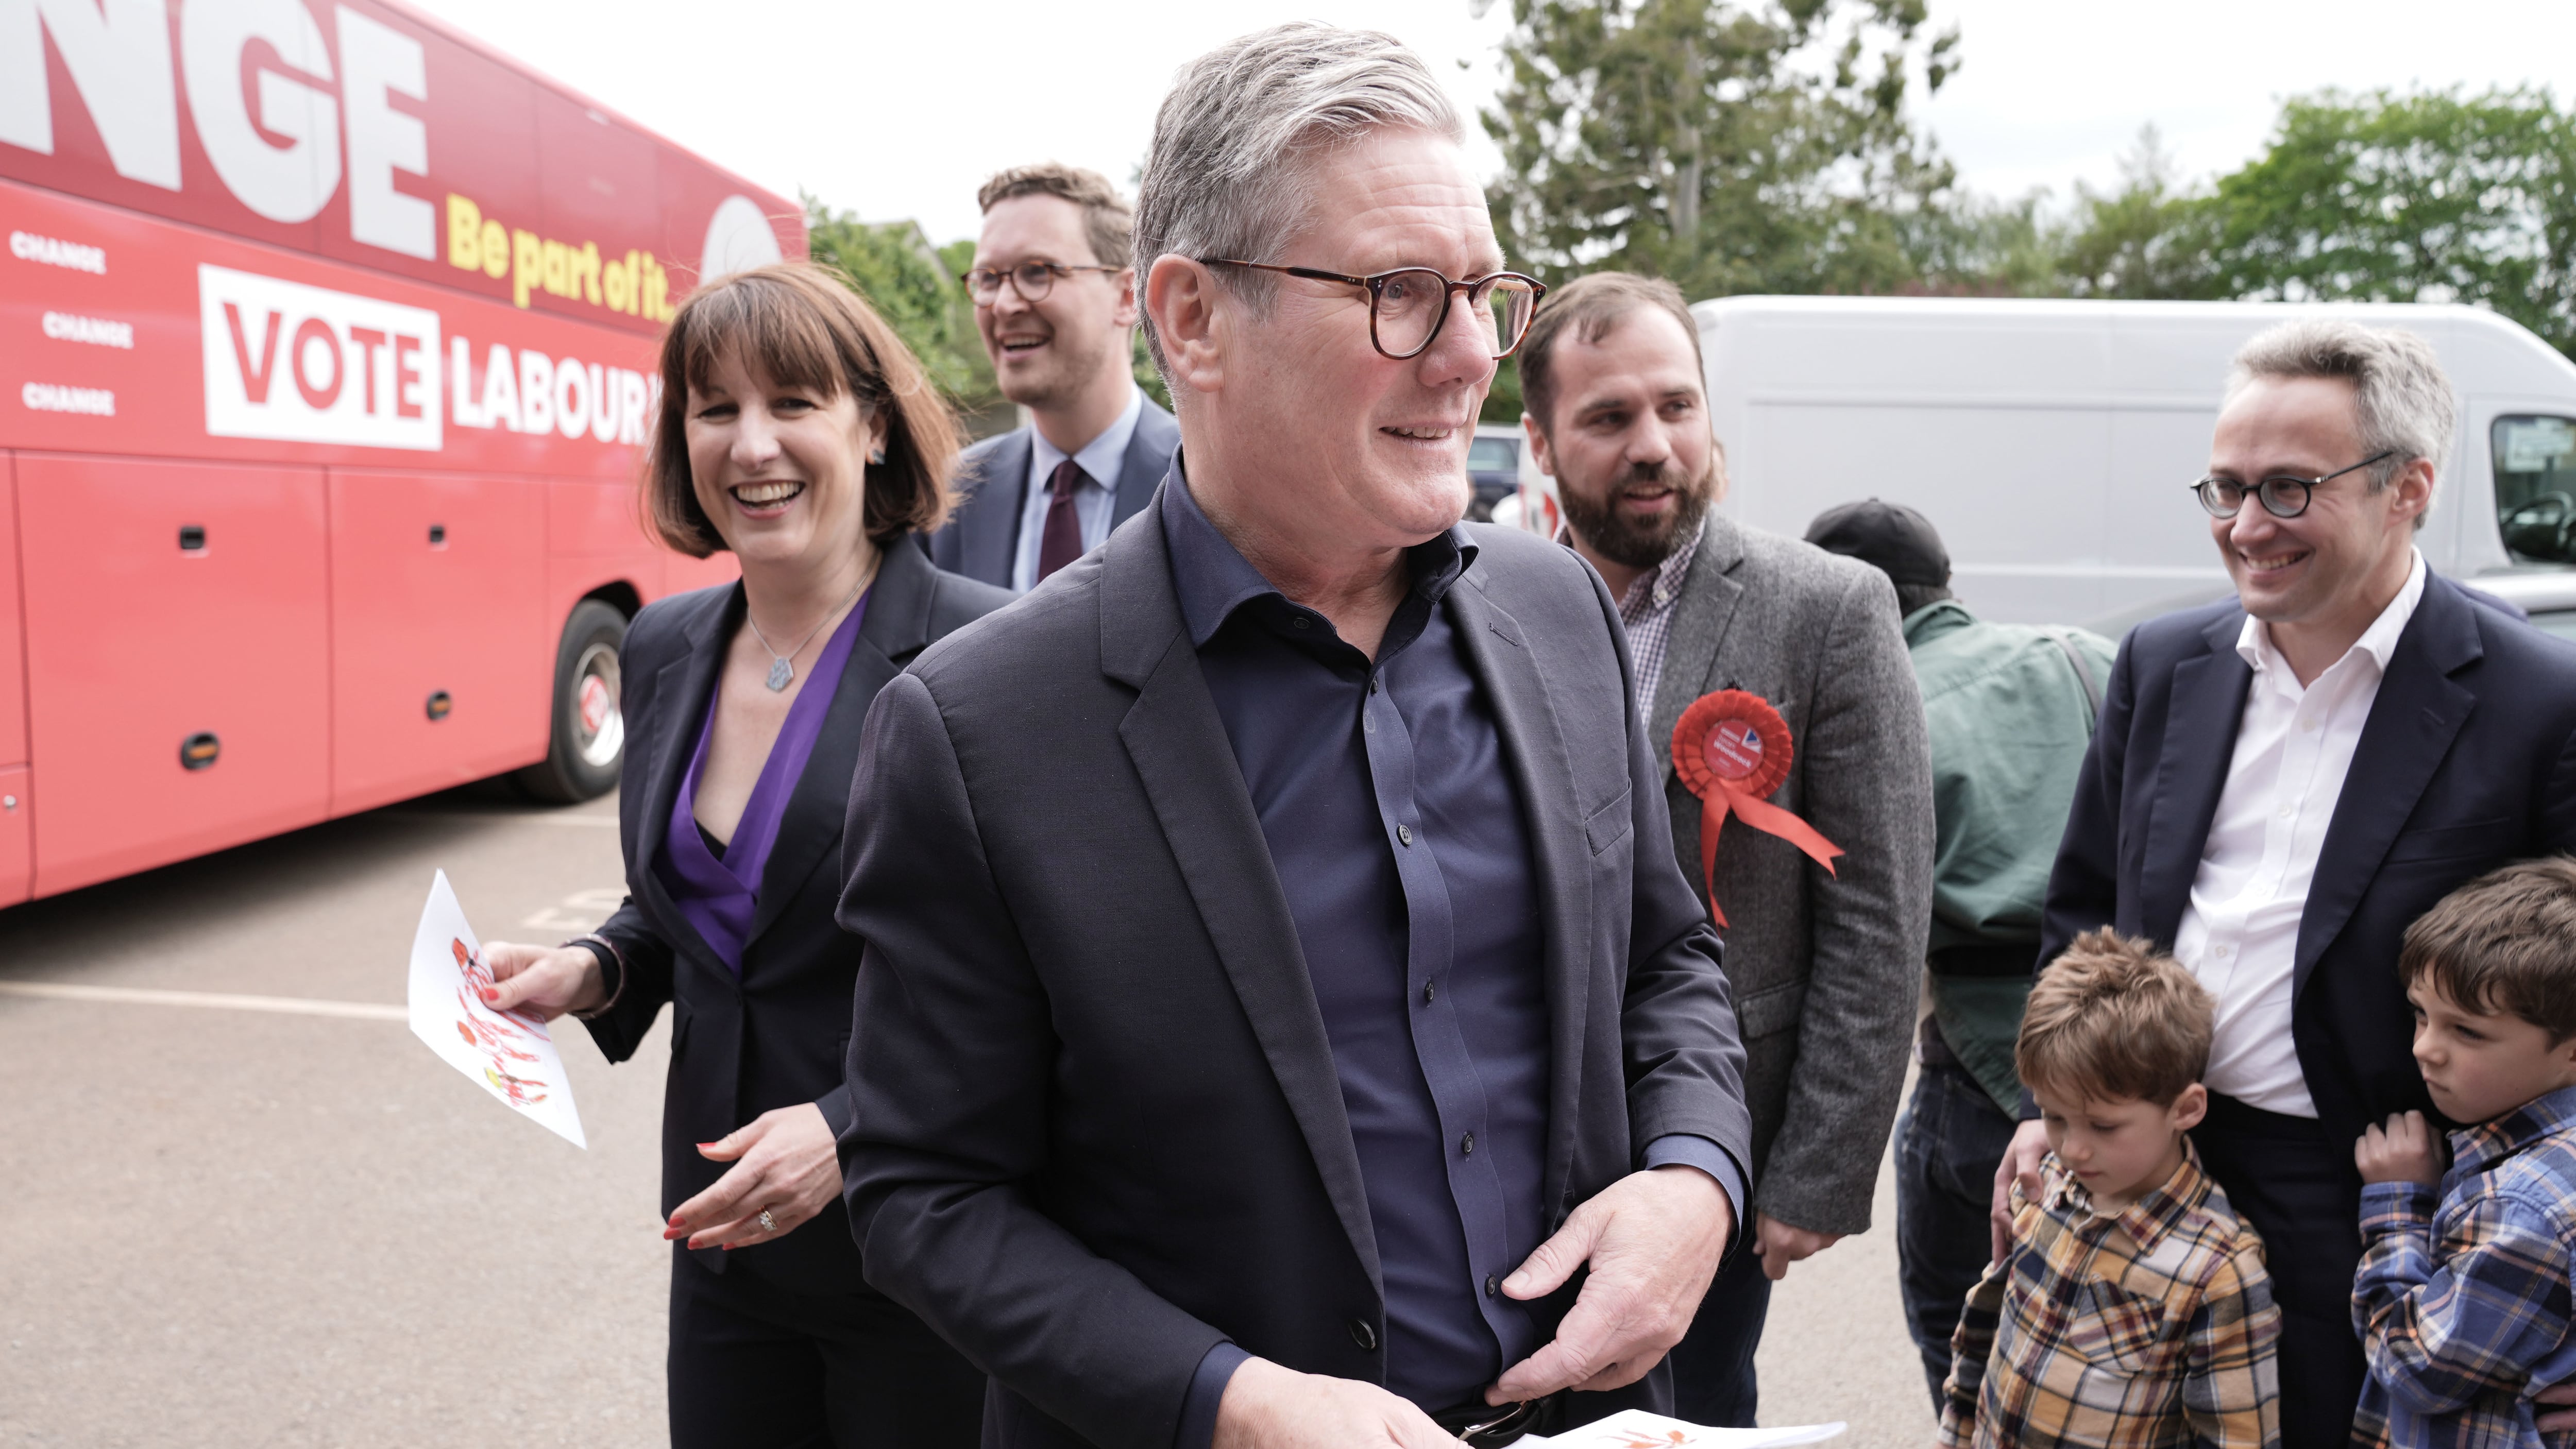 Labour leader Sir Keir Starmer and shadow chancellor Rachel Reeves arrive for a visit to Heath Farm in Chipping Norton, while on the General Election campaign trail